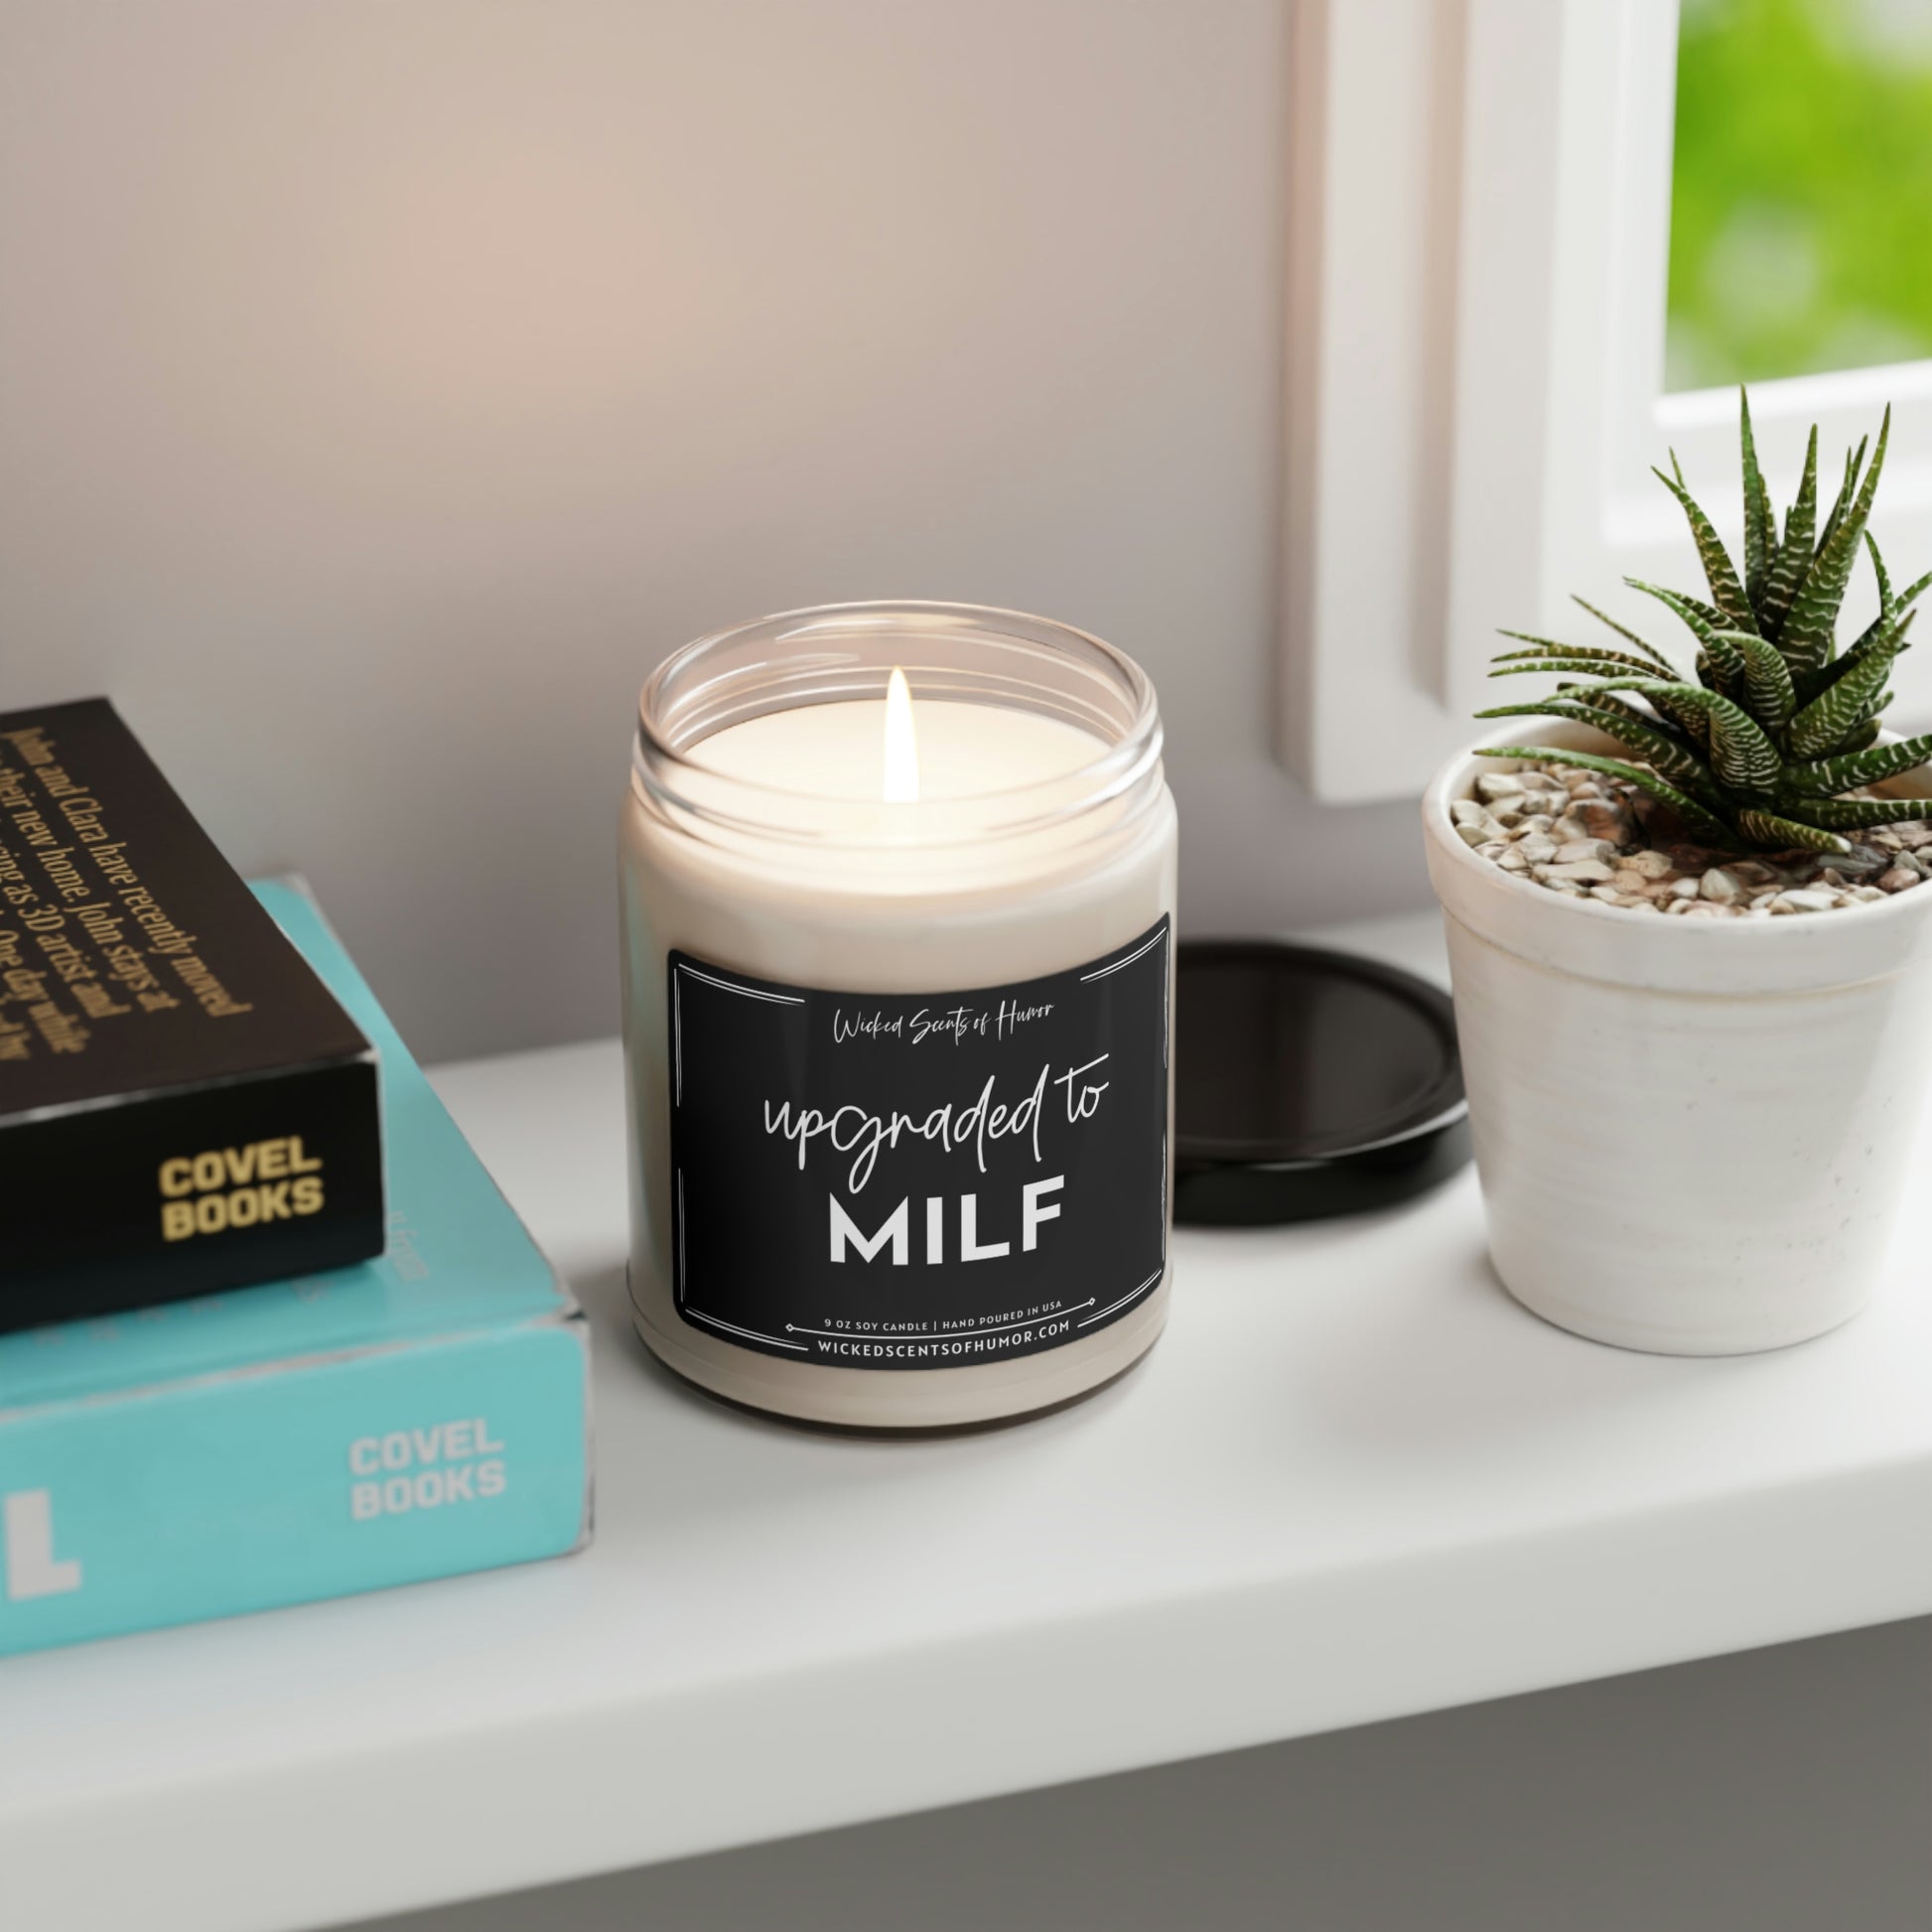 Upgraded to MILF Soy Candle, New Mom Gift, Pregnancy Gift, Baby Shower –  Wicked Scents of Humor